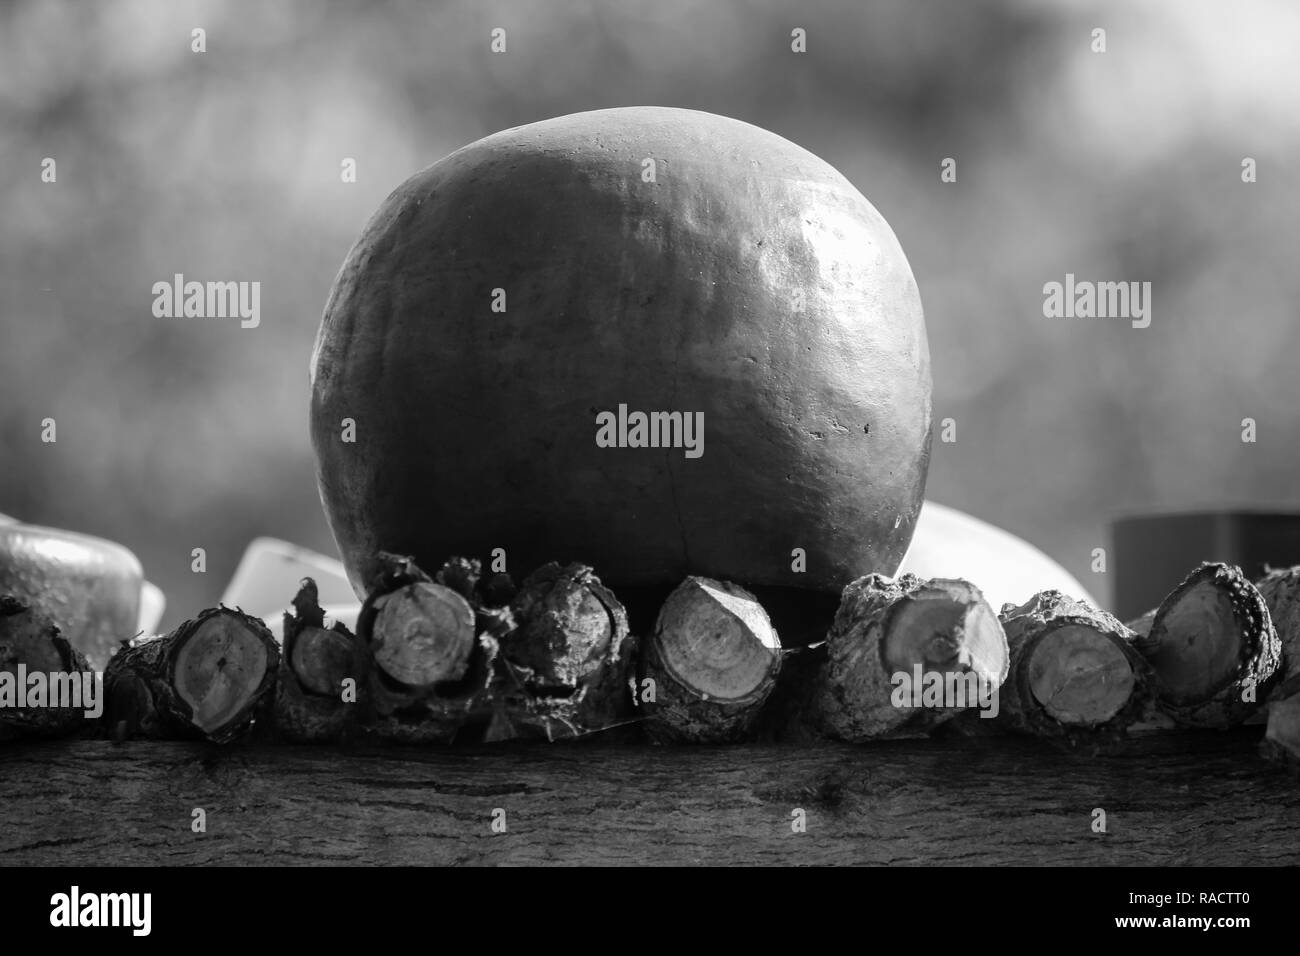 Traditional African cooking pot also known as the calabash set to dry on an elevated wooden make shift table. Stock Photo